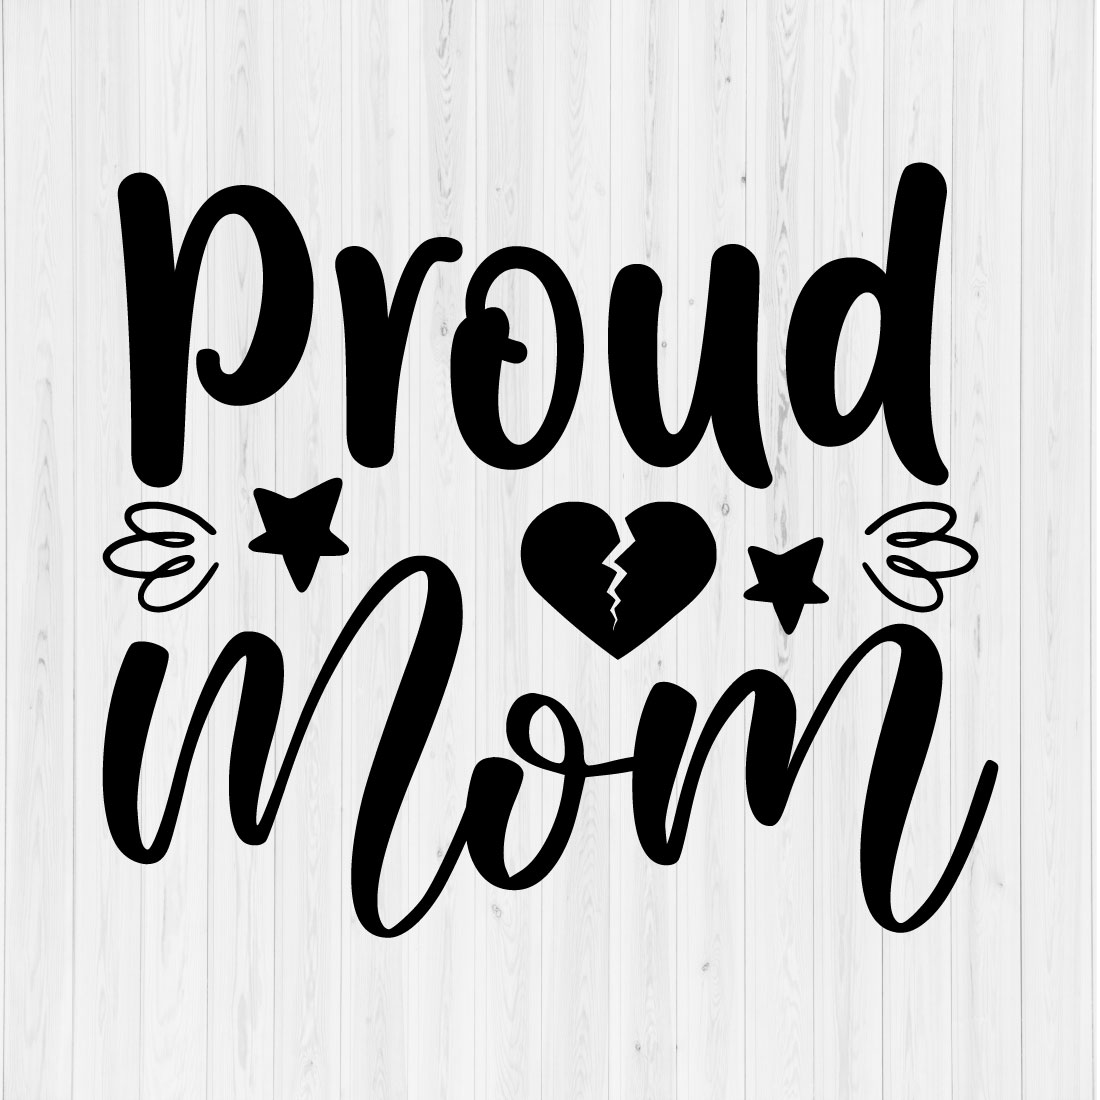 Proud Mom cover image.